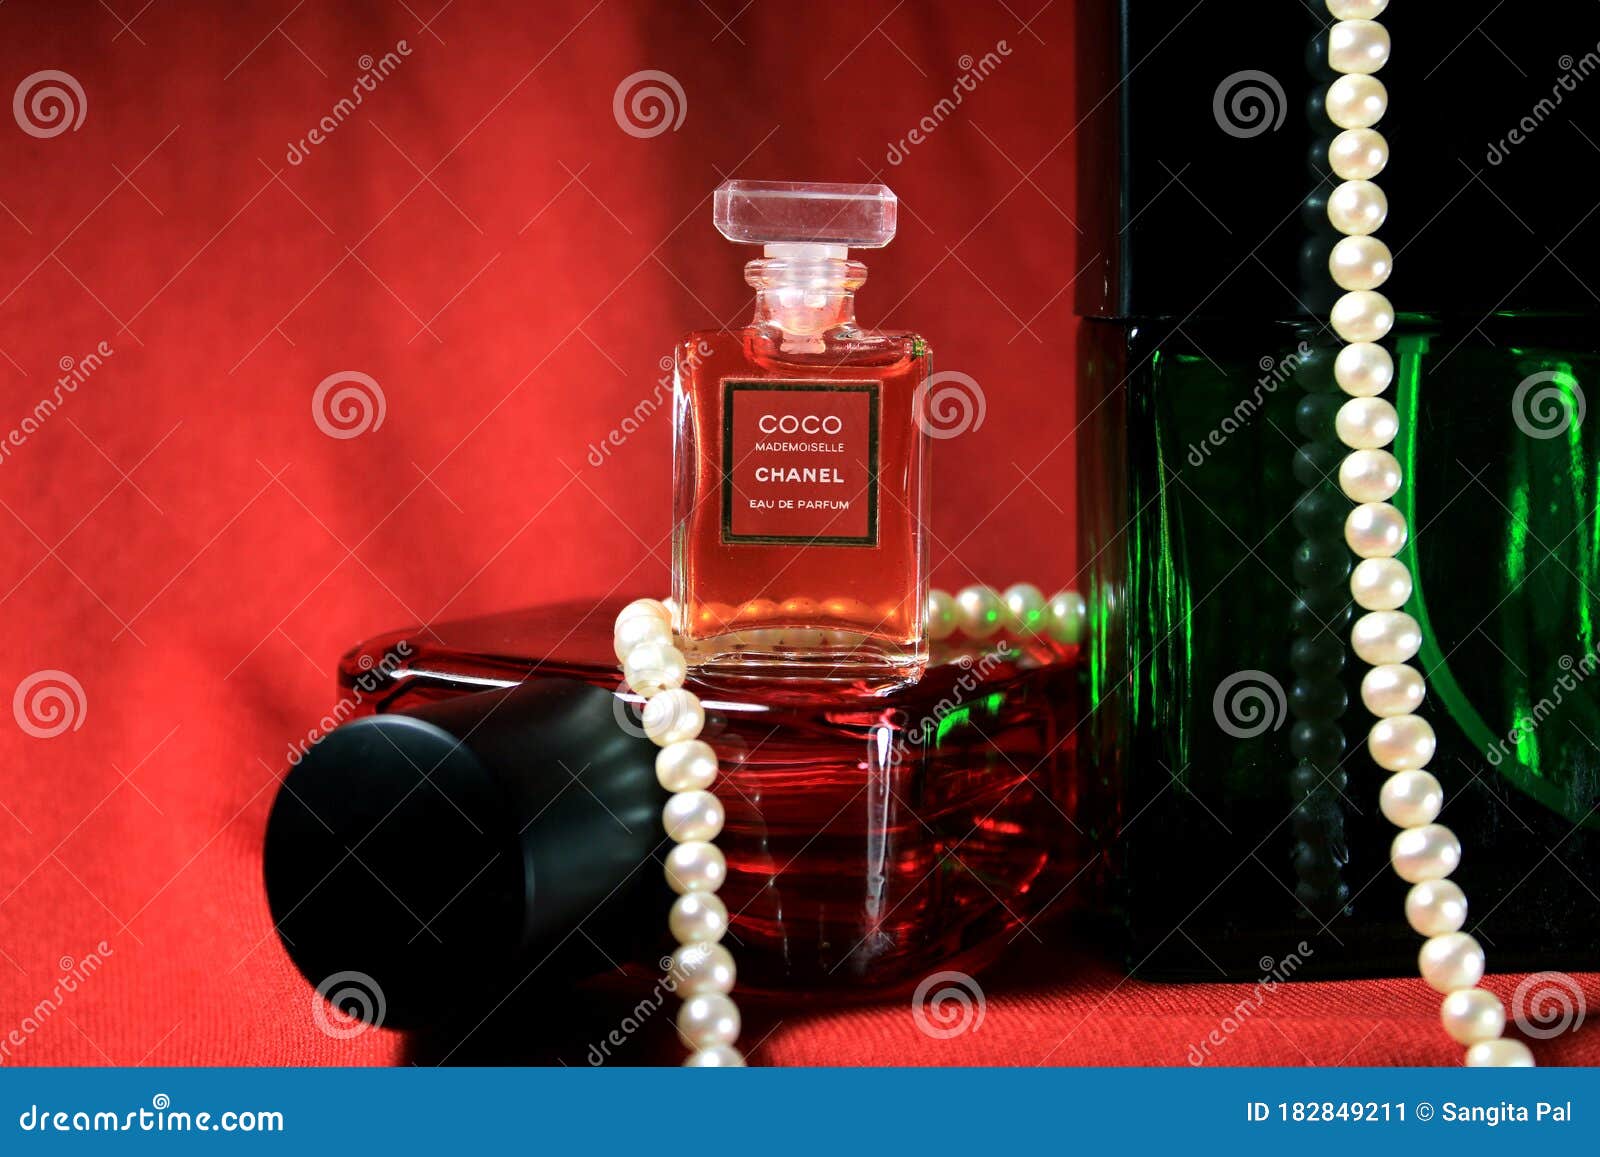 Chanel Perfume Bottles Isolated on Red Background. Bottle with